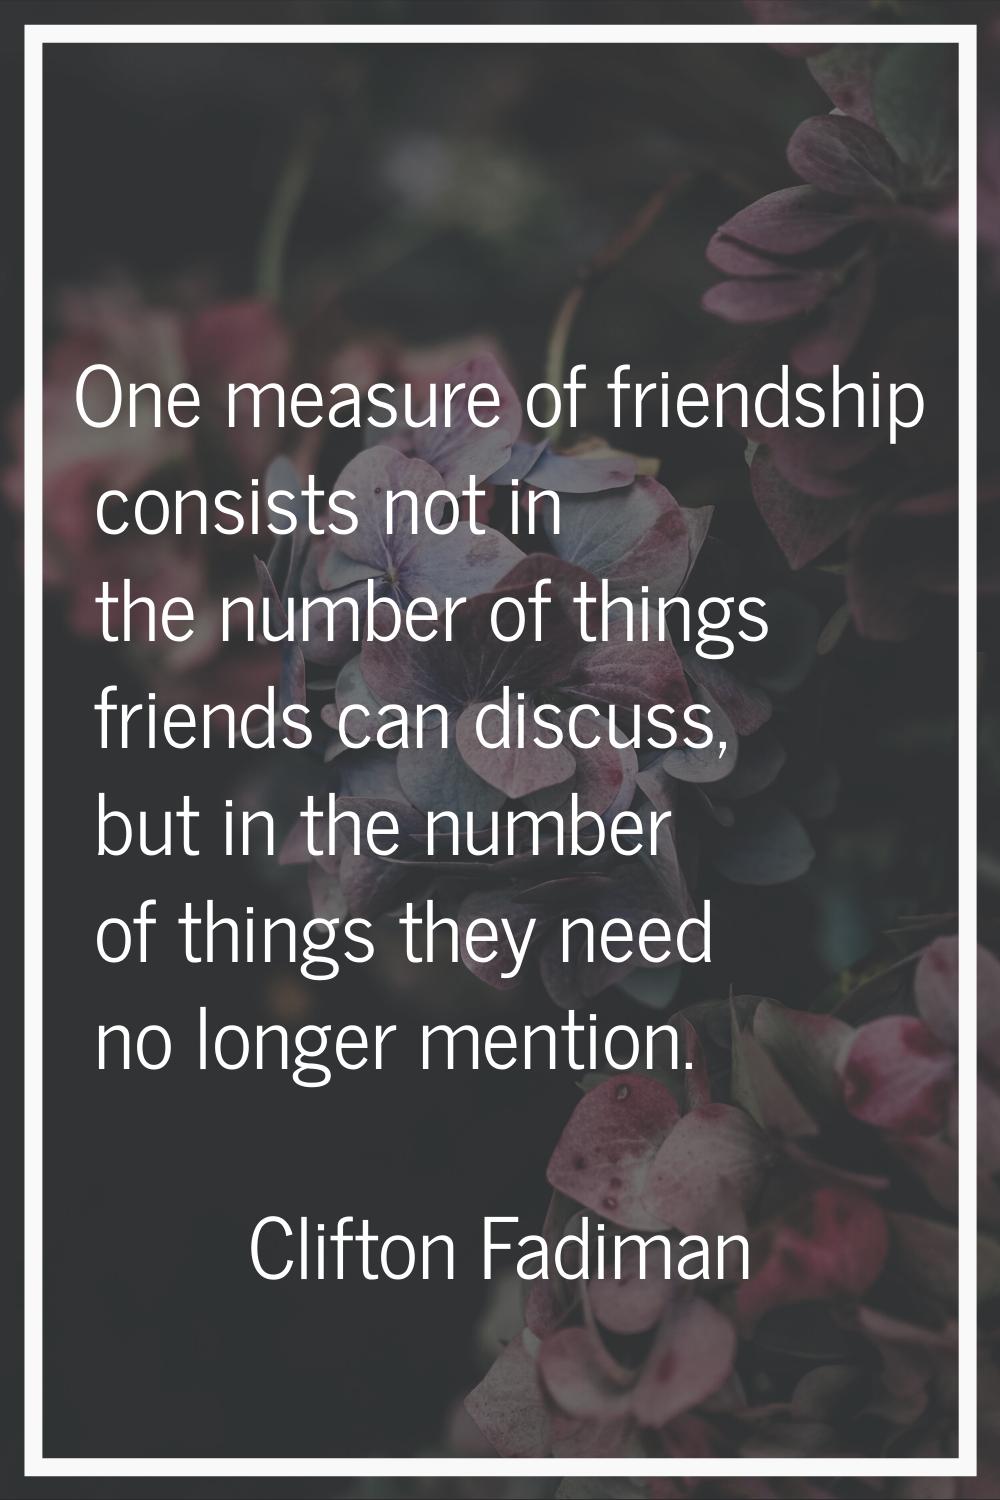 One measure of friendship consists not in the number of things friends can discuss, but in the numb